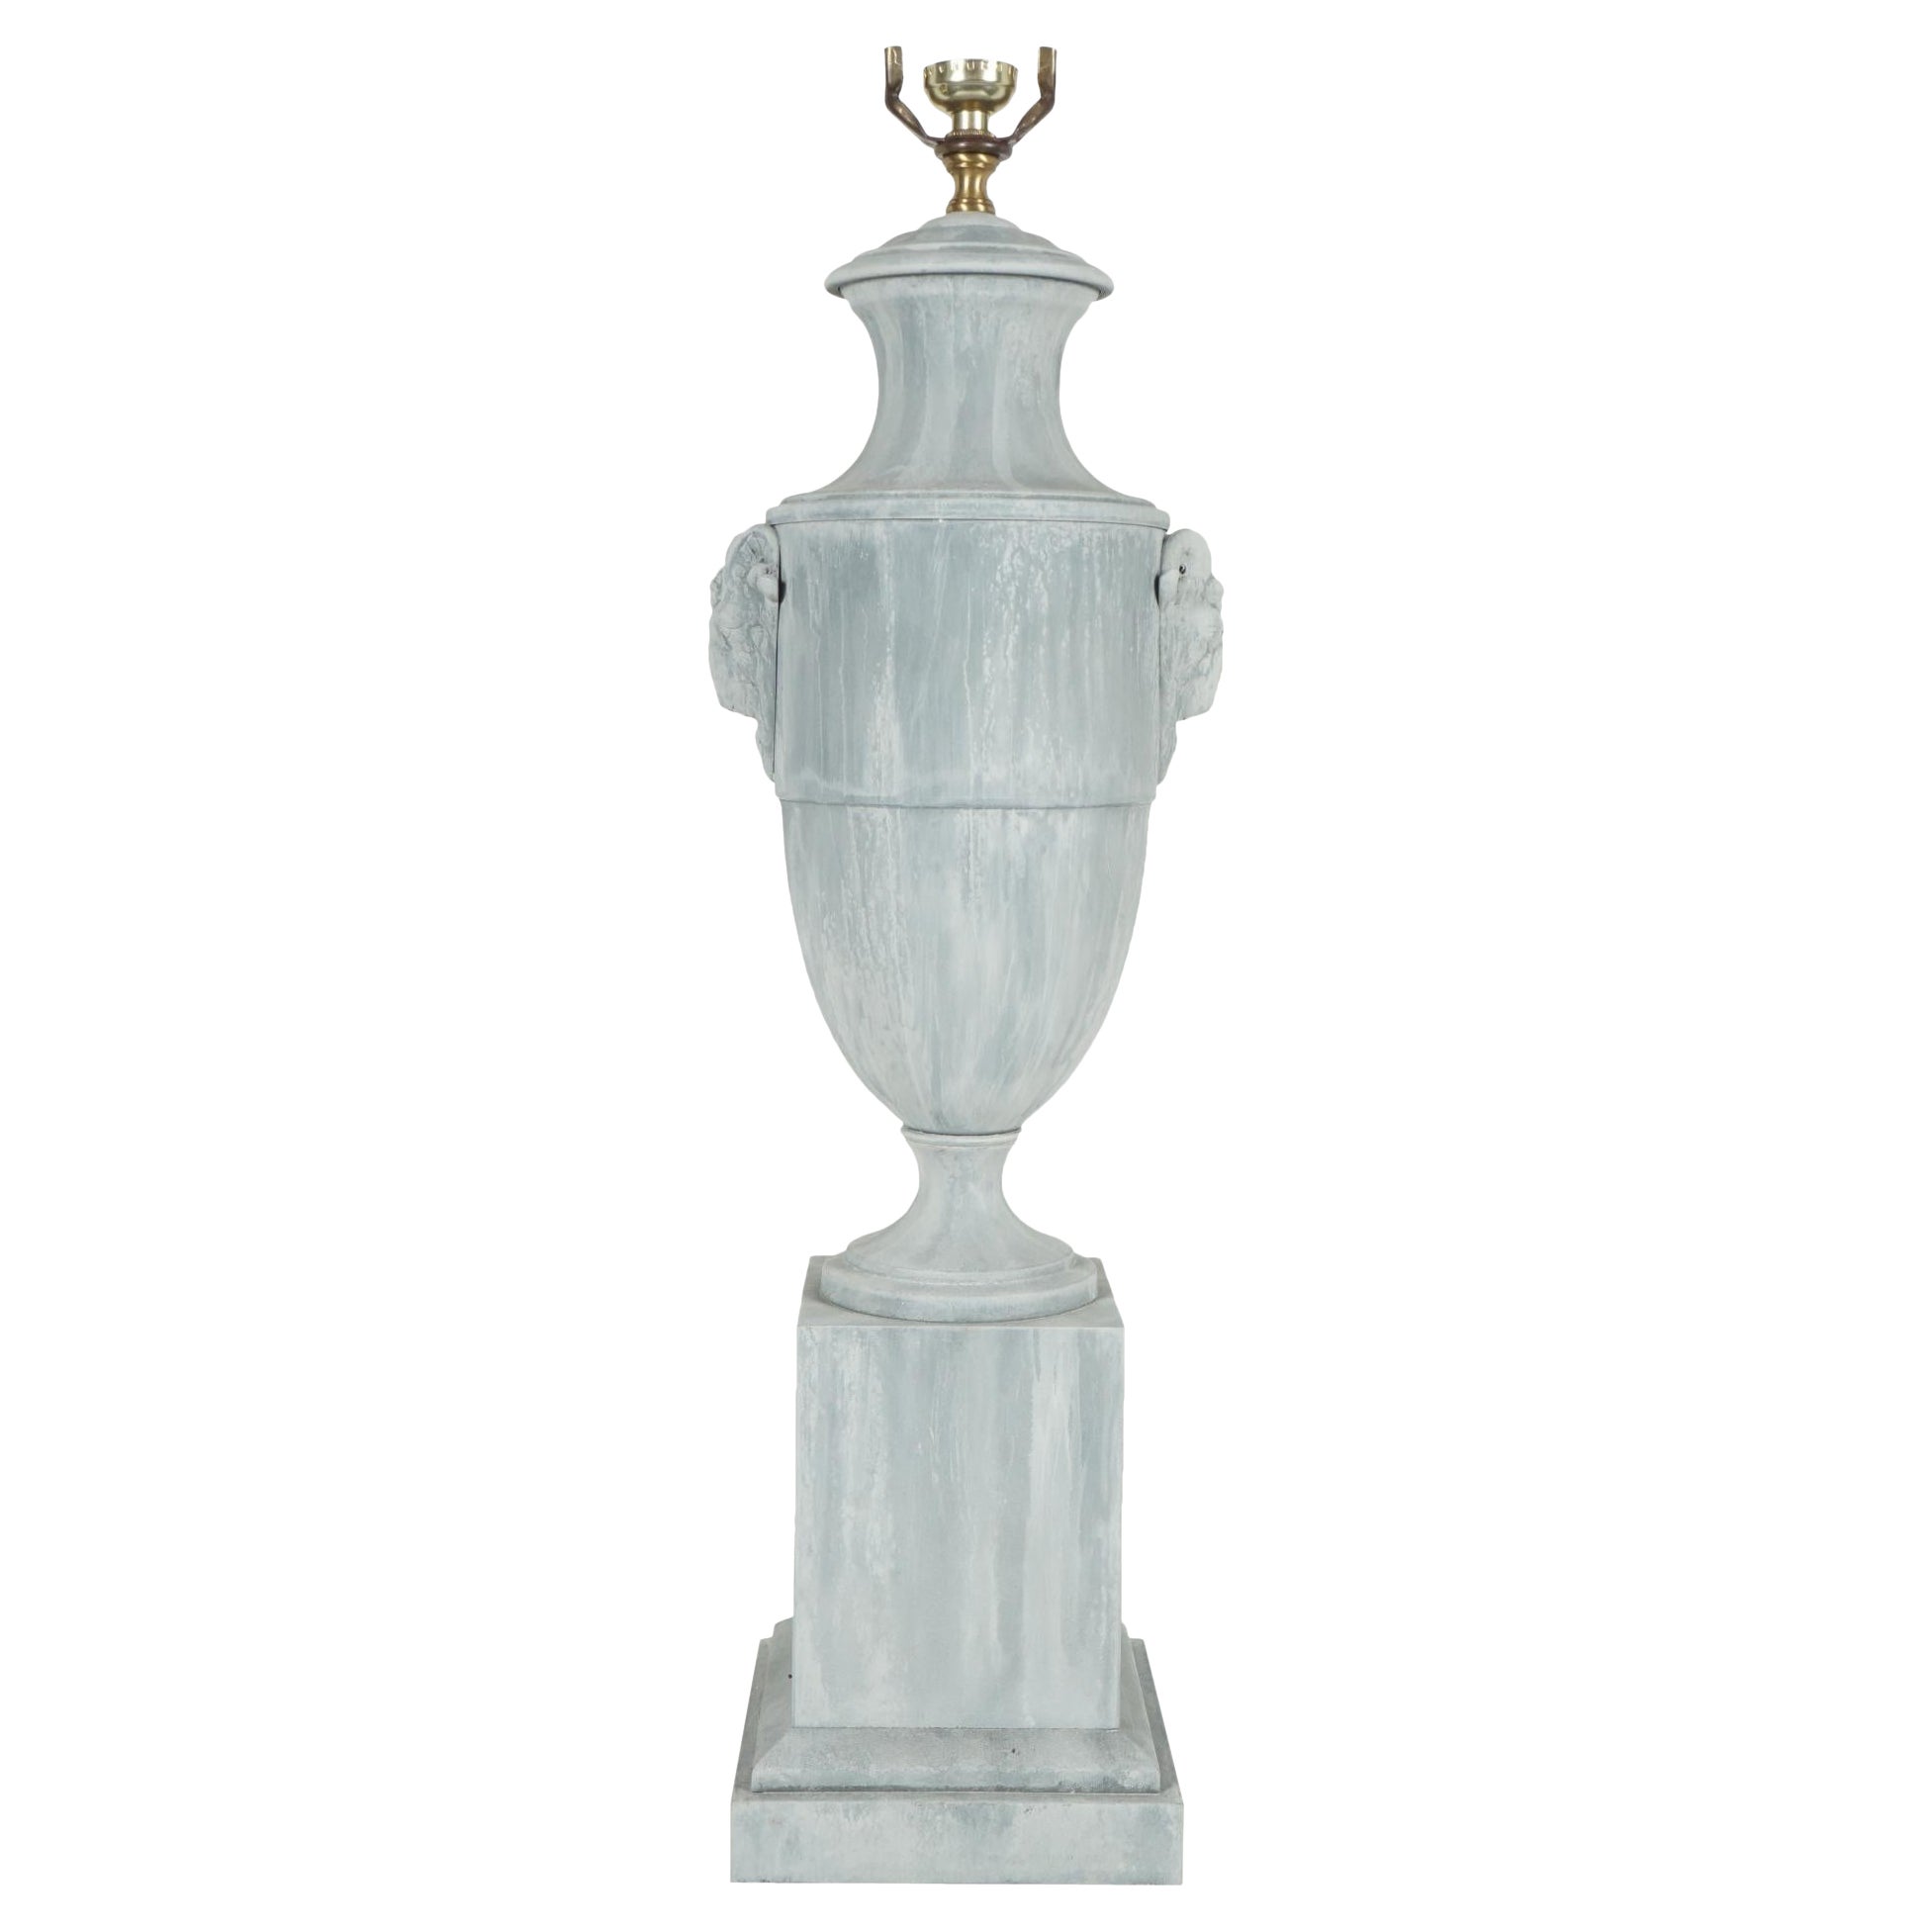 Early 20th Century French Zinc Urn Lamp from the Estate of Bunny Mellon